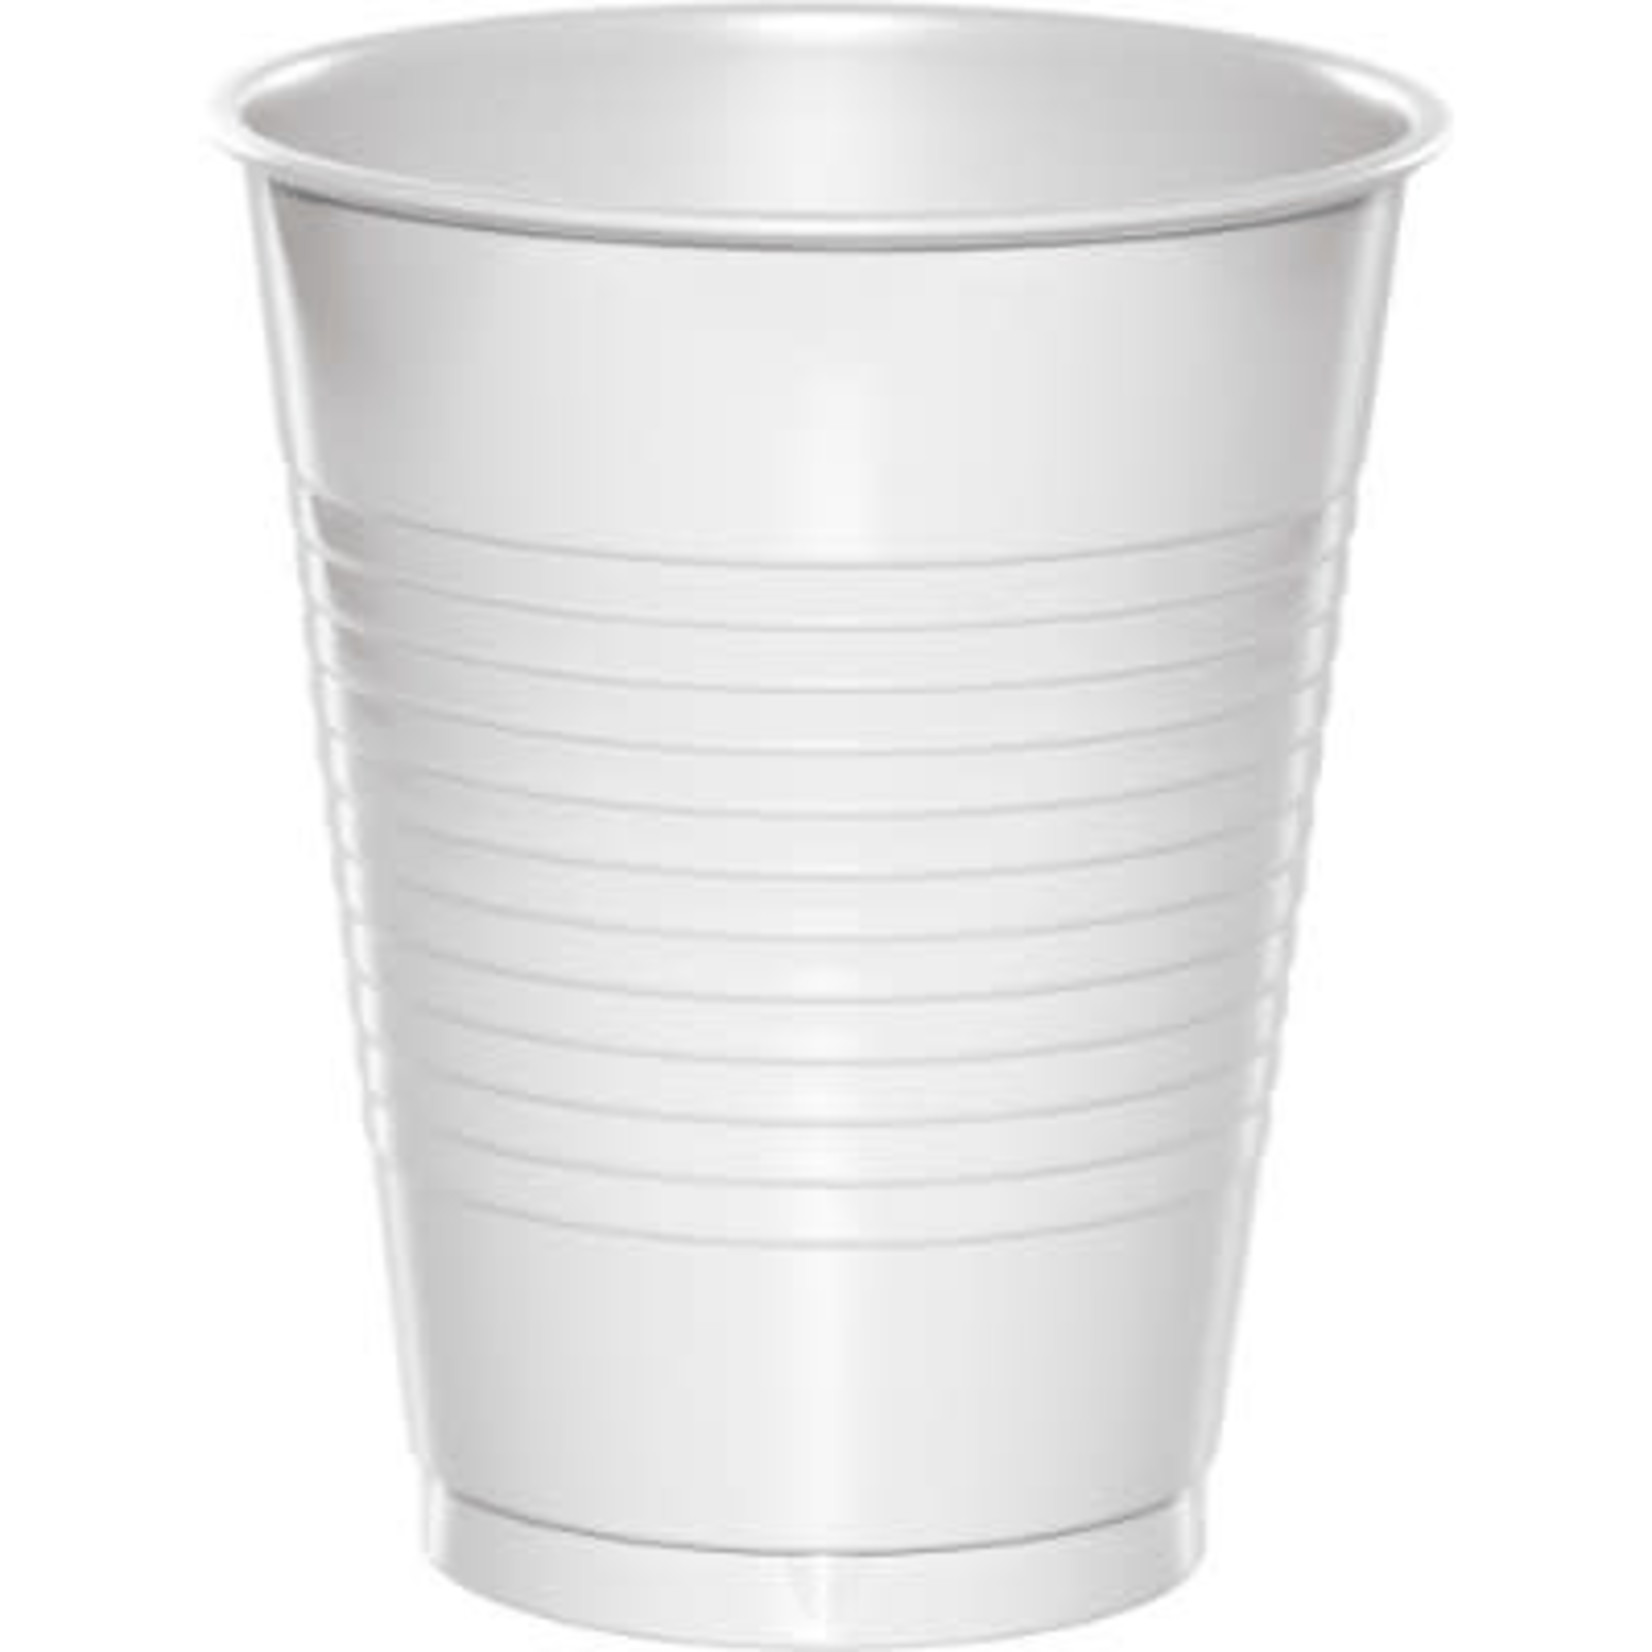 Touch of Color 16oz. White Plastic Cups - 20ct.